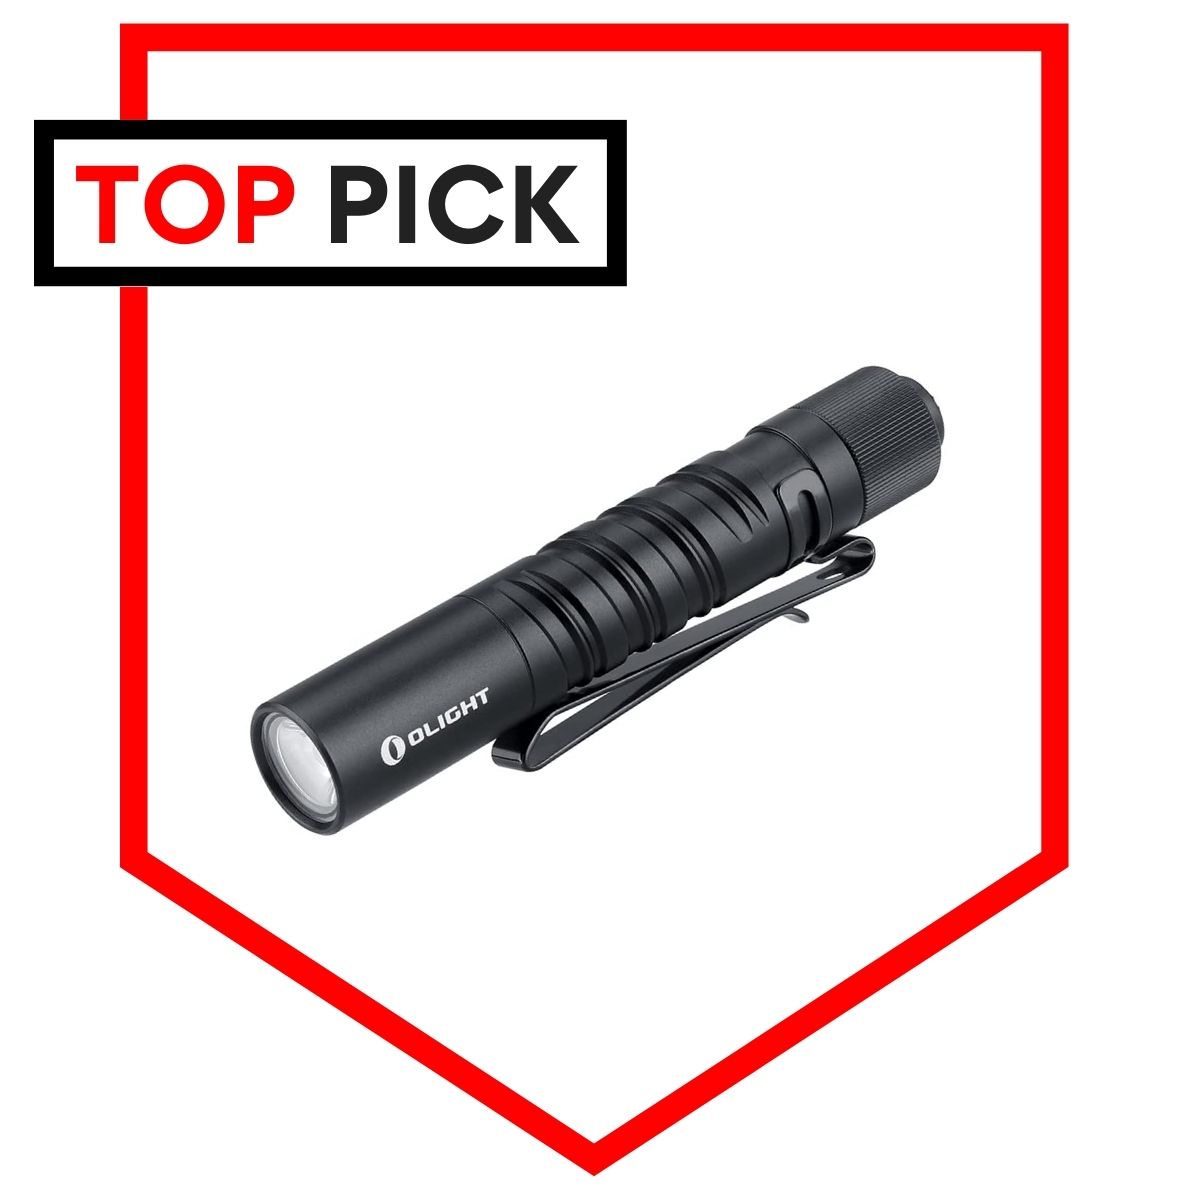 https://www.trueprepper.com/wp-content/uploads/Olight-I3T-EOS-EDC-Flashlight-AAA-Battery-Powered-for-Everyday-Keychain-Pocket-Clip-or-Pouch.jpg